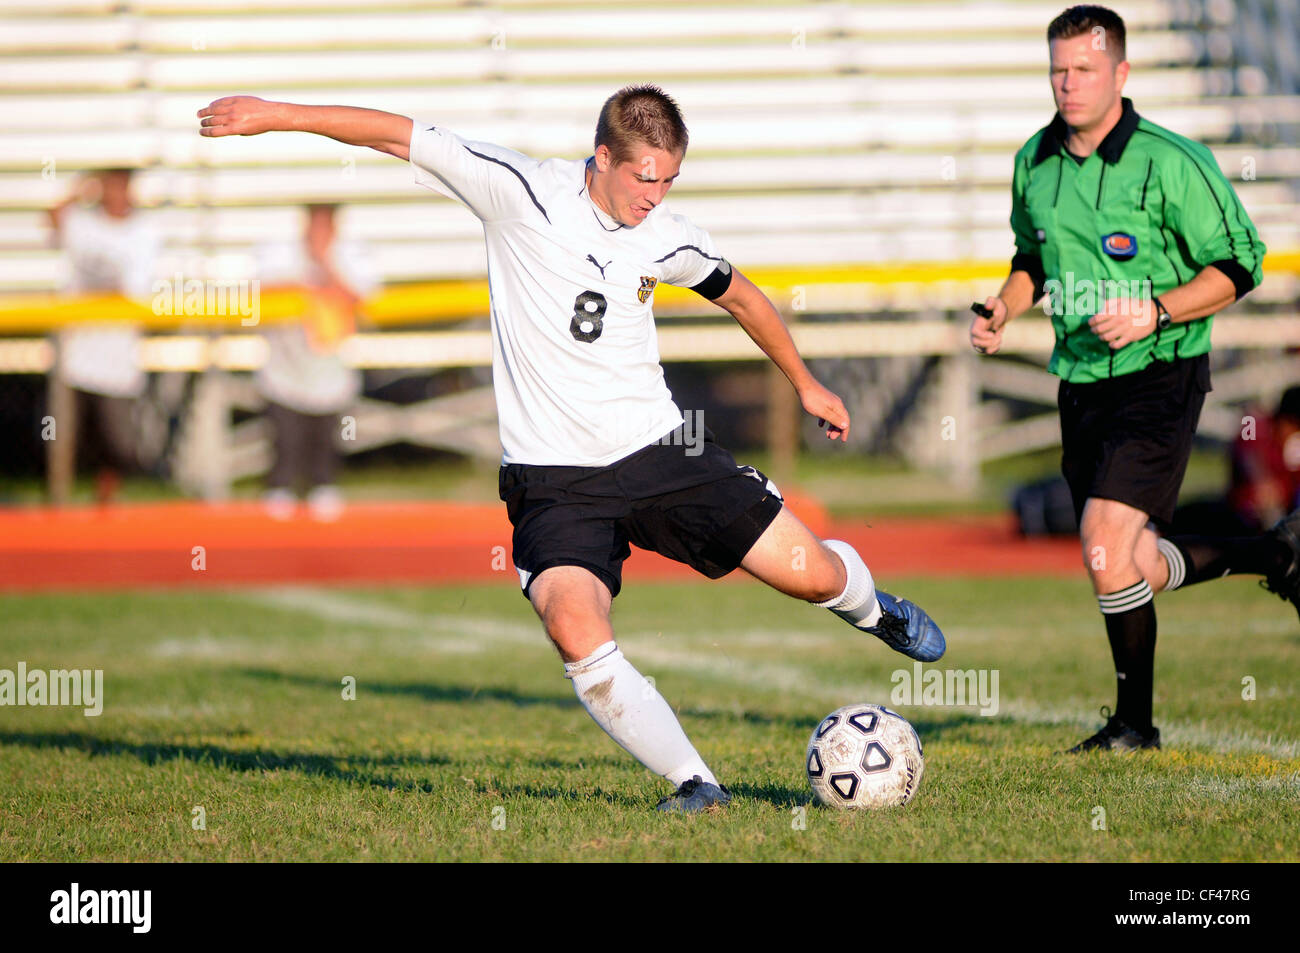 Player gets off an uncontested shot during a high school soccer match. USA. Stock Photo